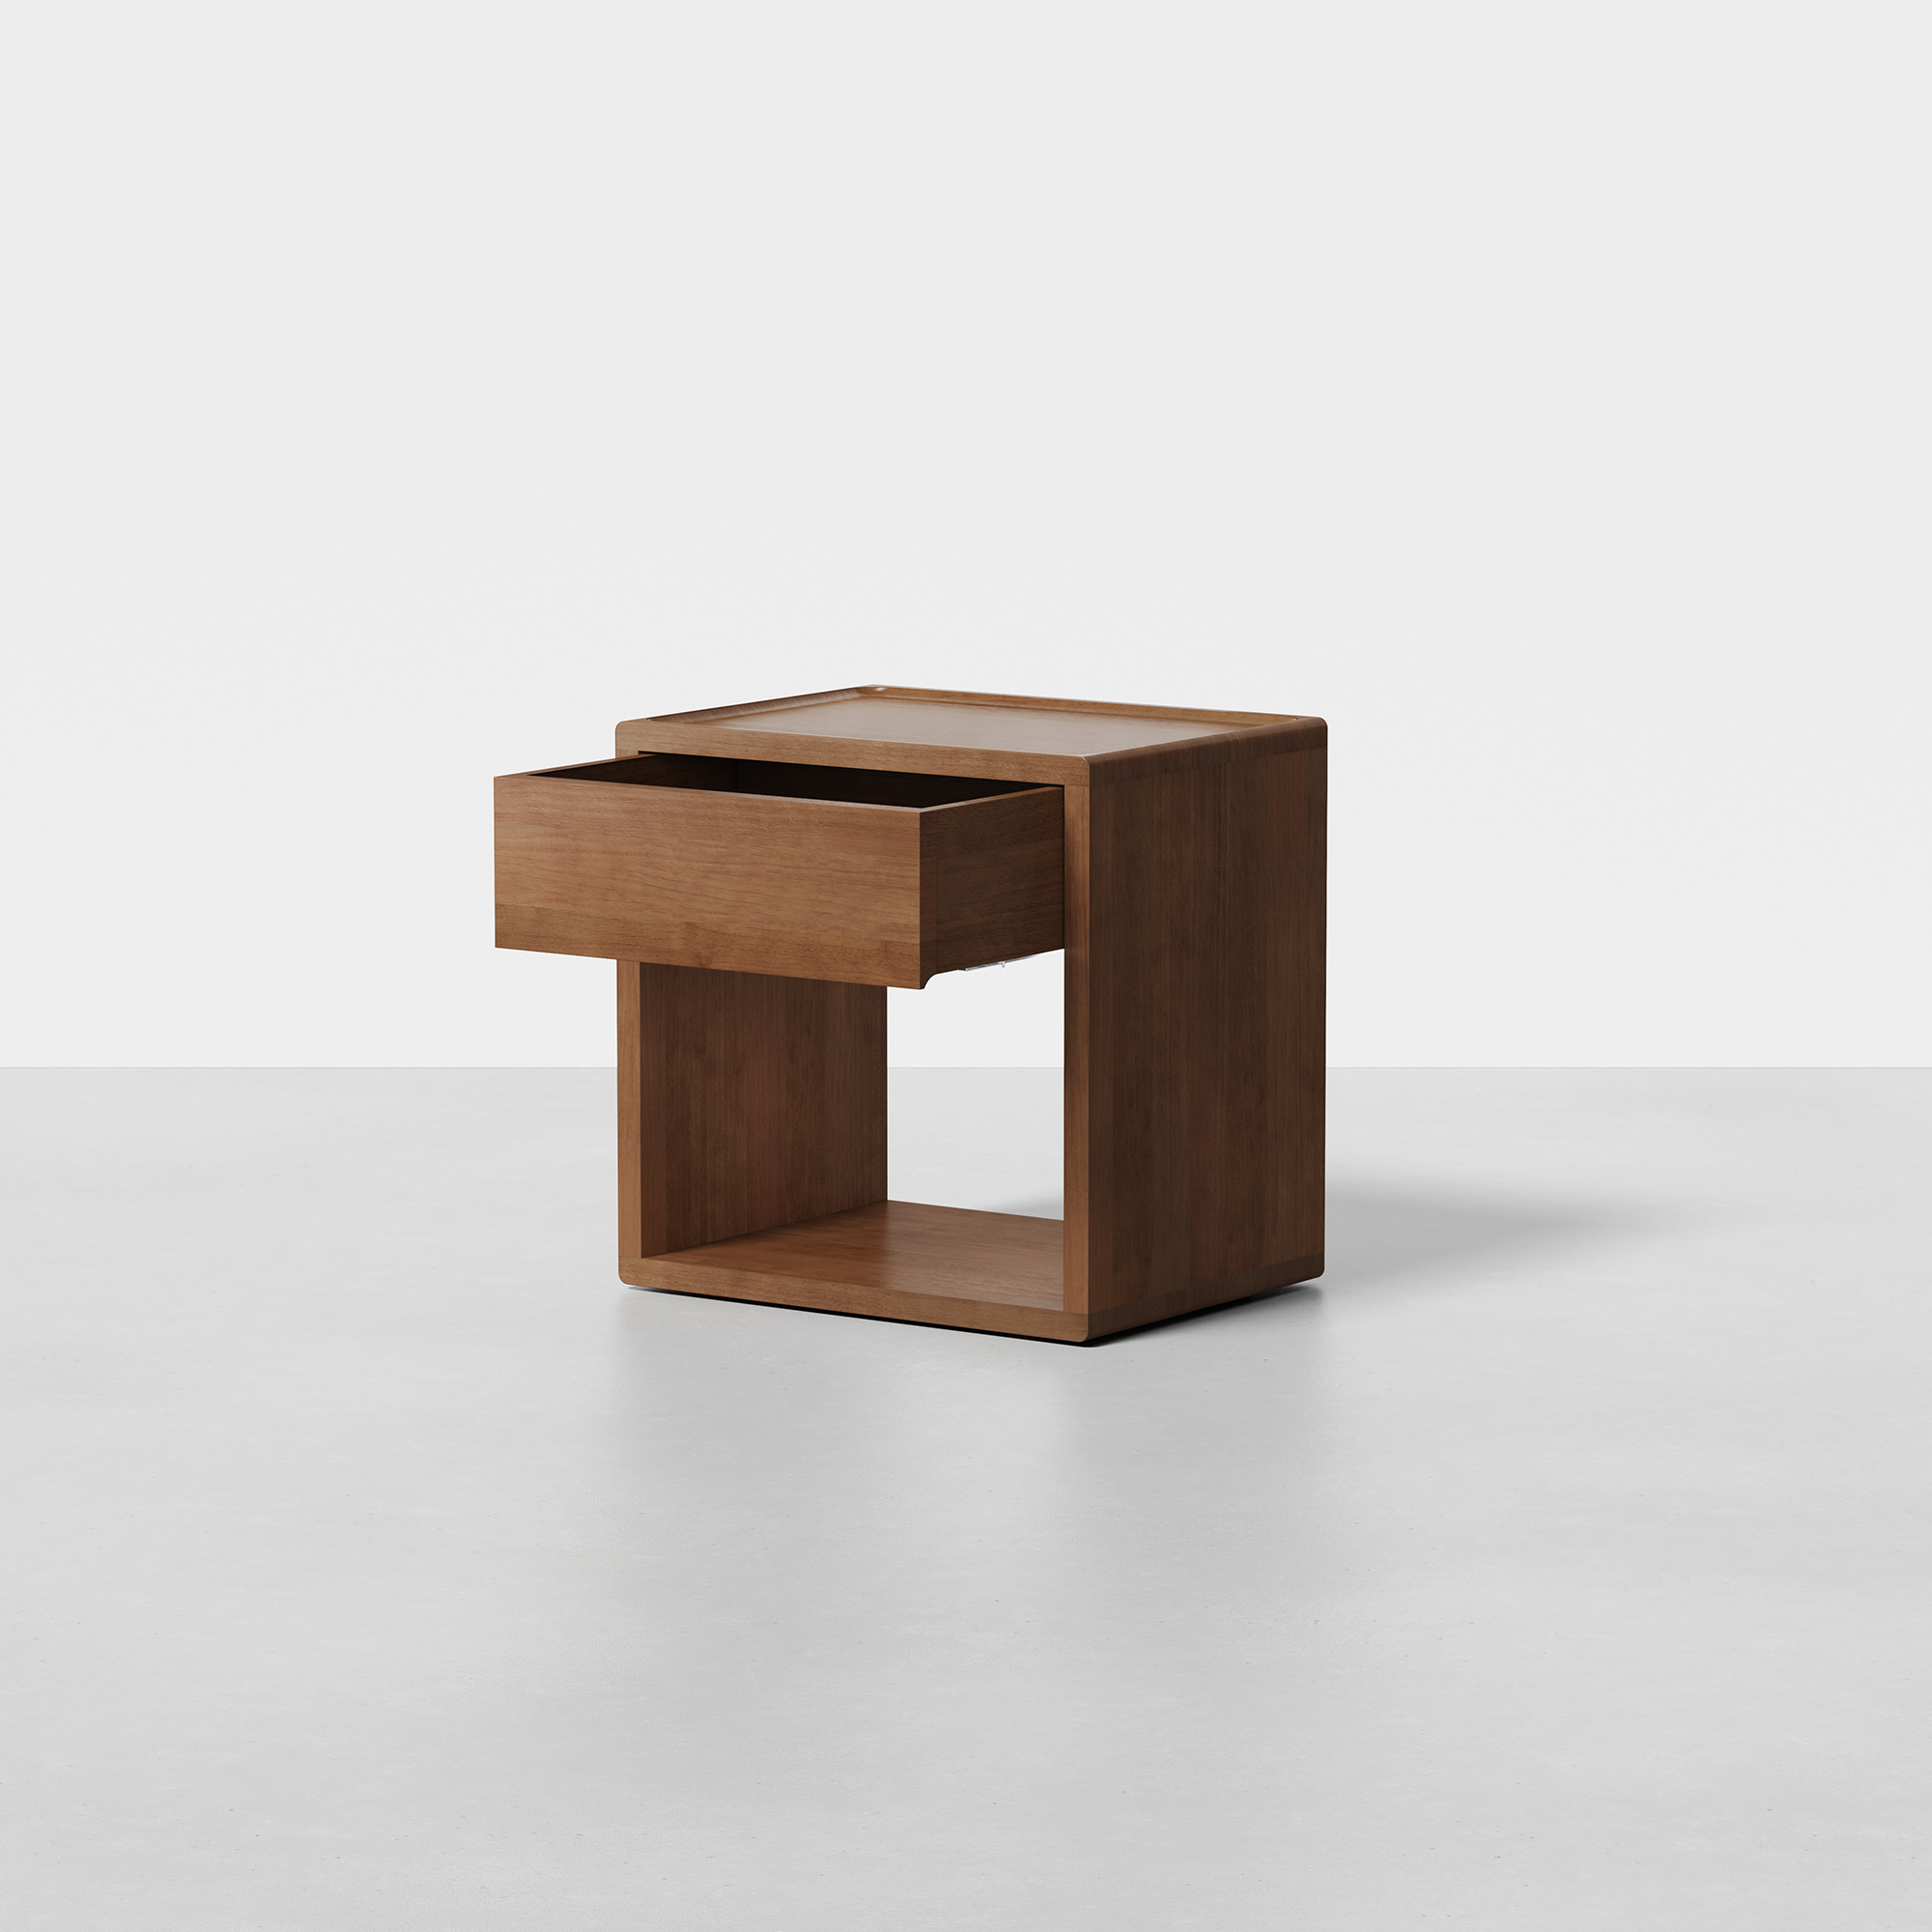 PDP Image: The Nightstand (Walnut) - Render - Drawer